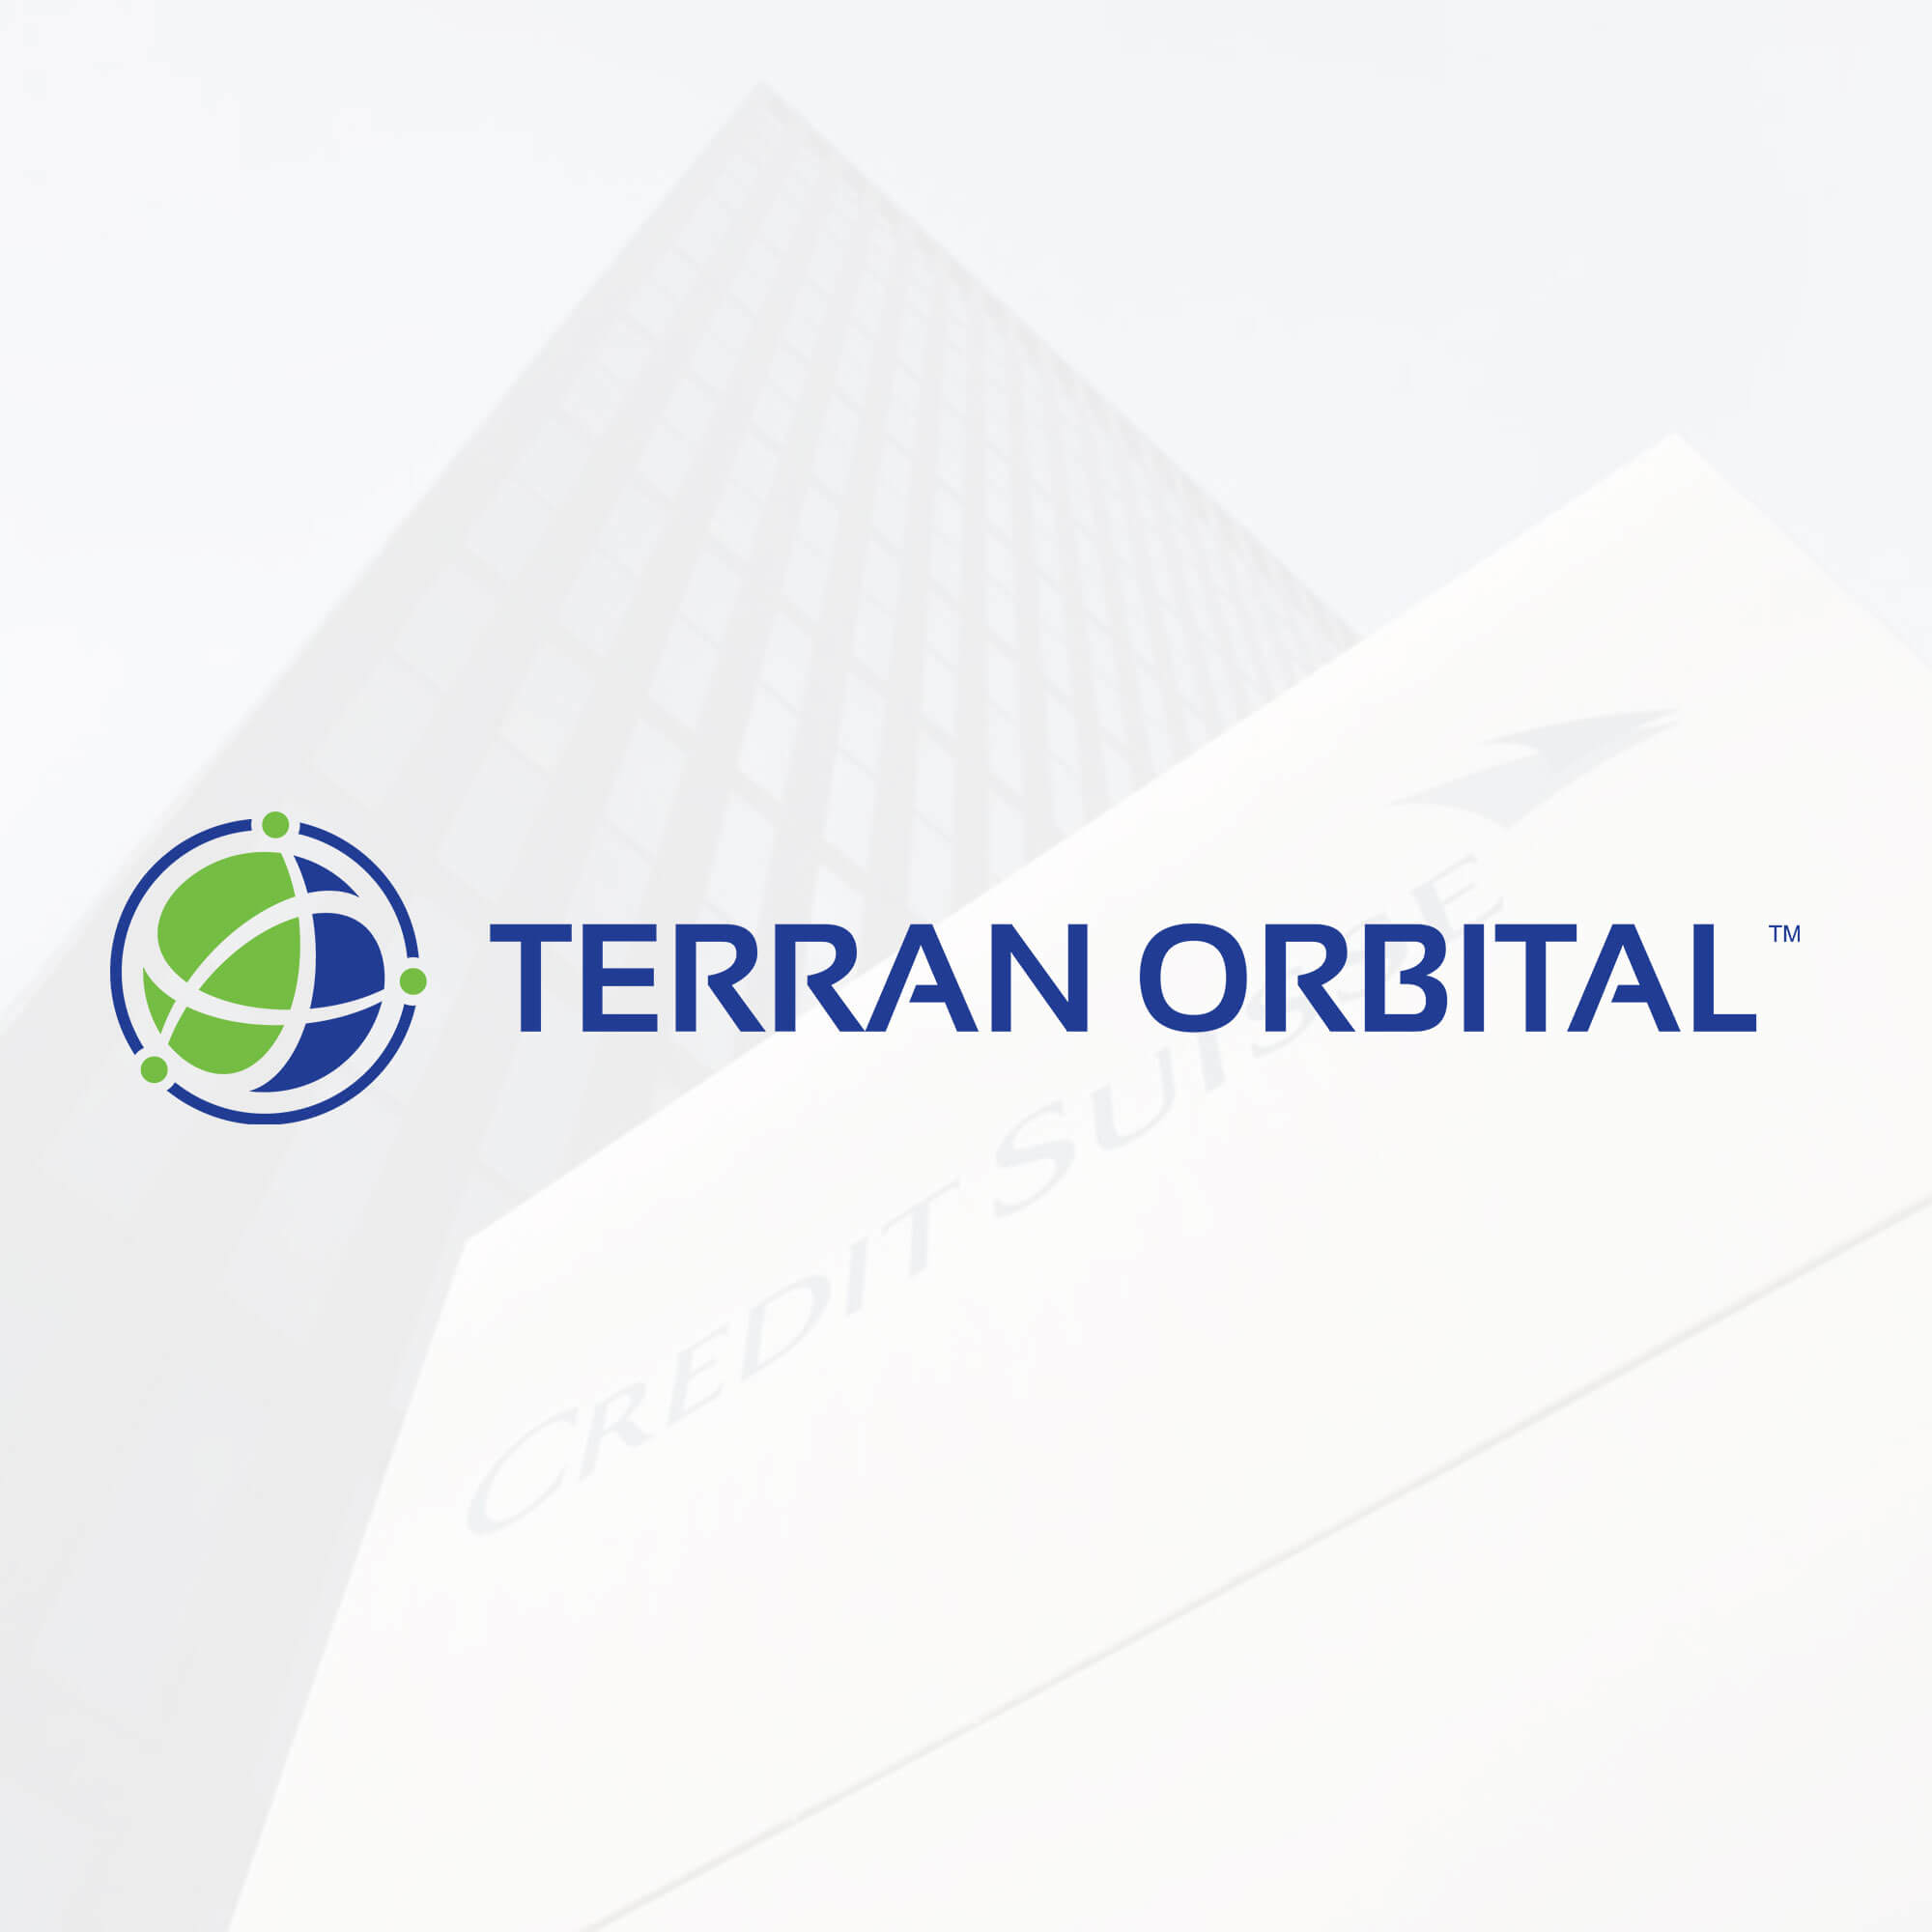 Terran Orbital to Participate in Credit Suisse 10th Annual Global Industrials Conference